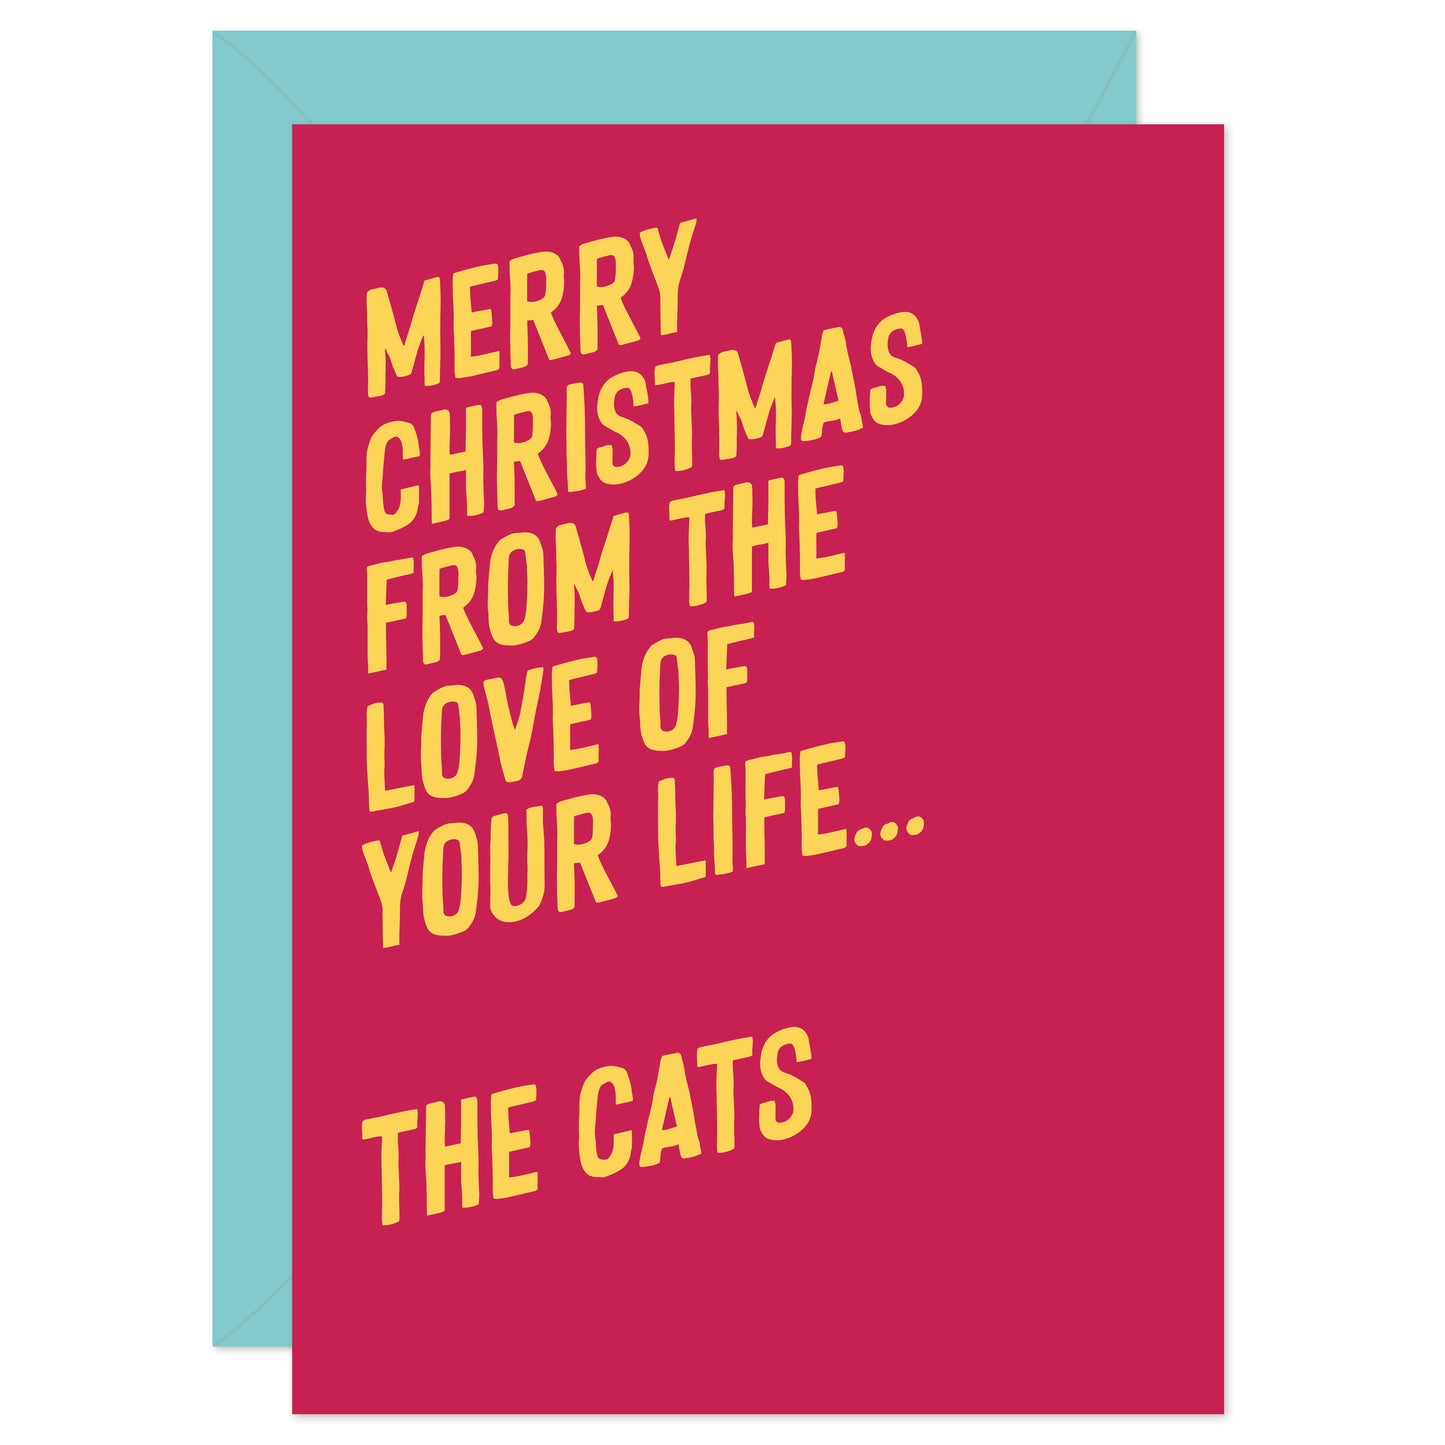 From the cat Christmas card